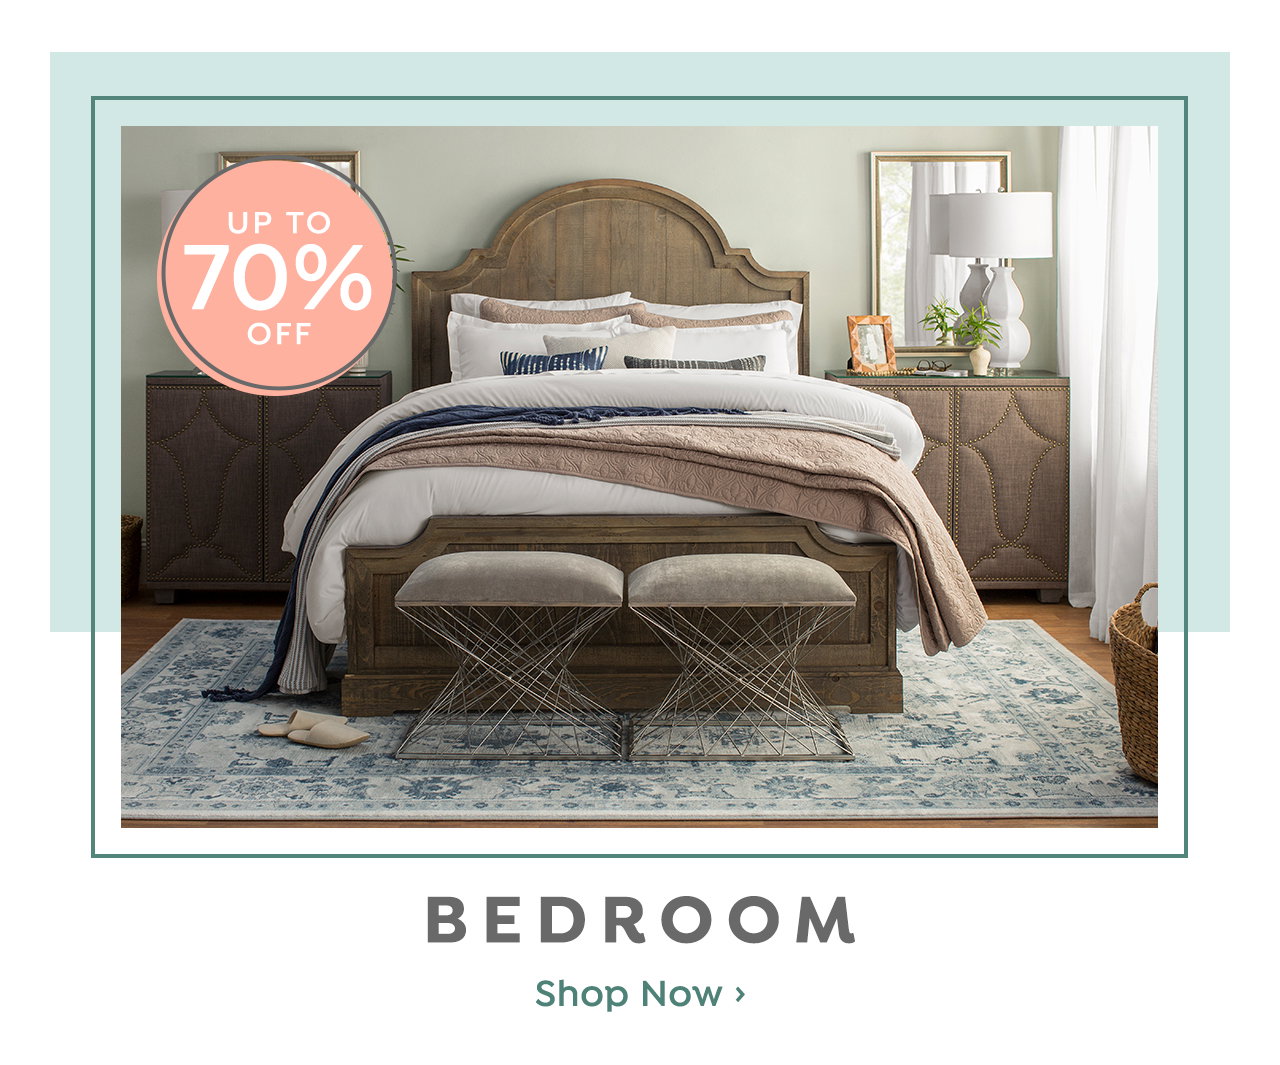 Joss & Main: Living room furniture UP TO 70% OFF at The Outlet! On now ...